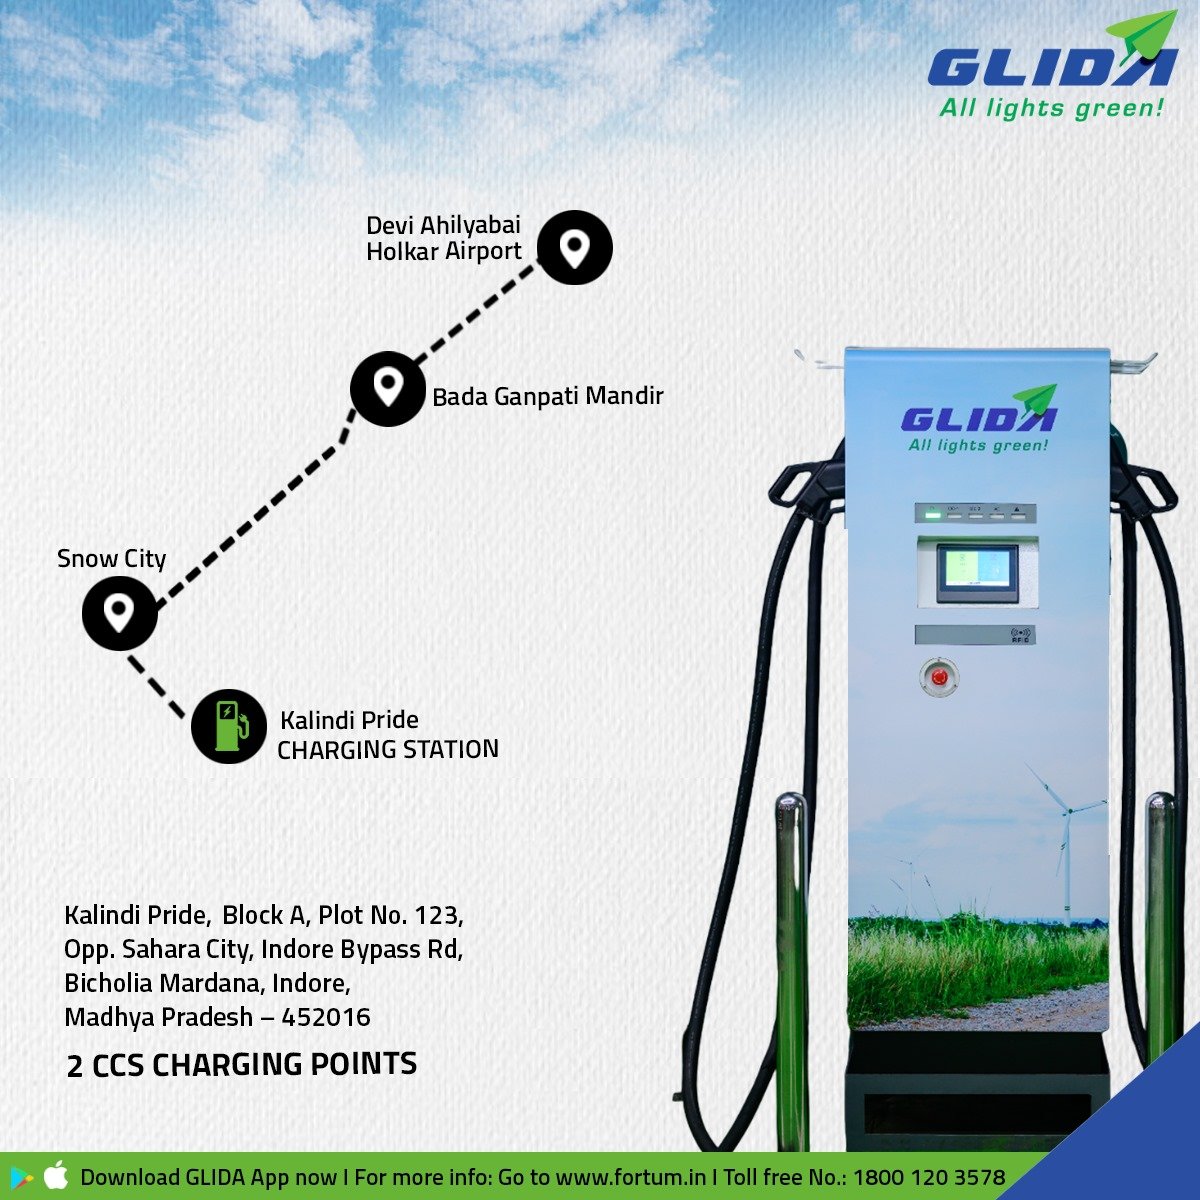 @GlidaIndia is committed to empowering EV users through a robust public #charginginfrastructure. Our latest #chargingstation in Indore, Madhya Pradesh, is now open! Share a photo of your #EVcharging at our new launch for a chance to be featured on #GLIDA's social media channels